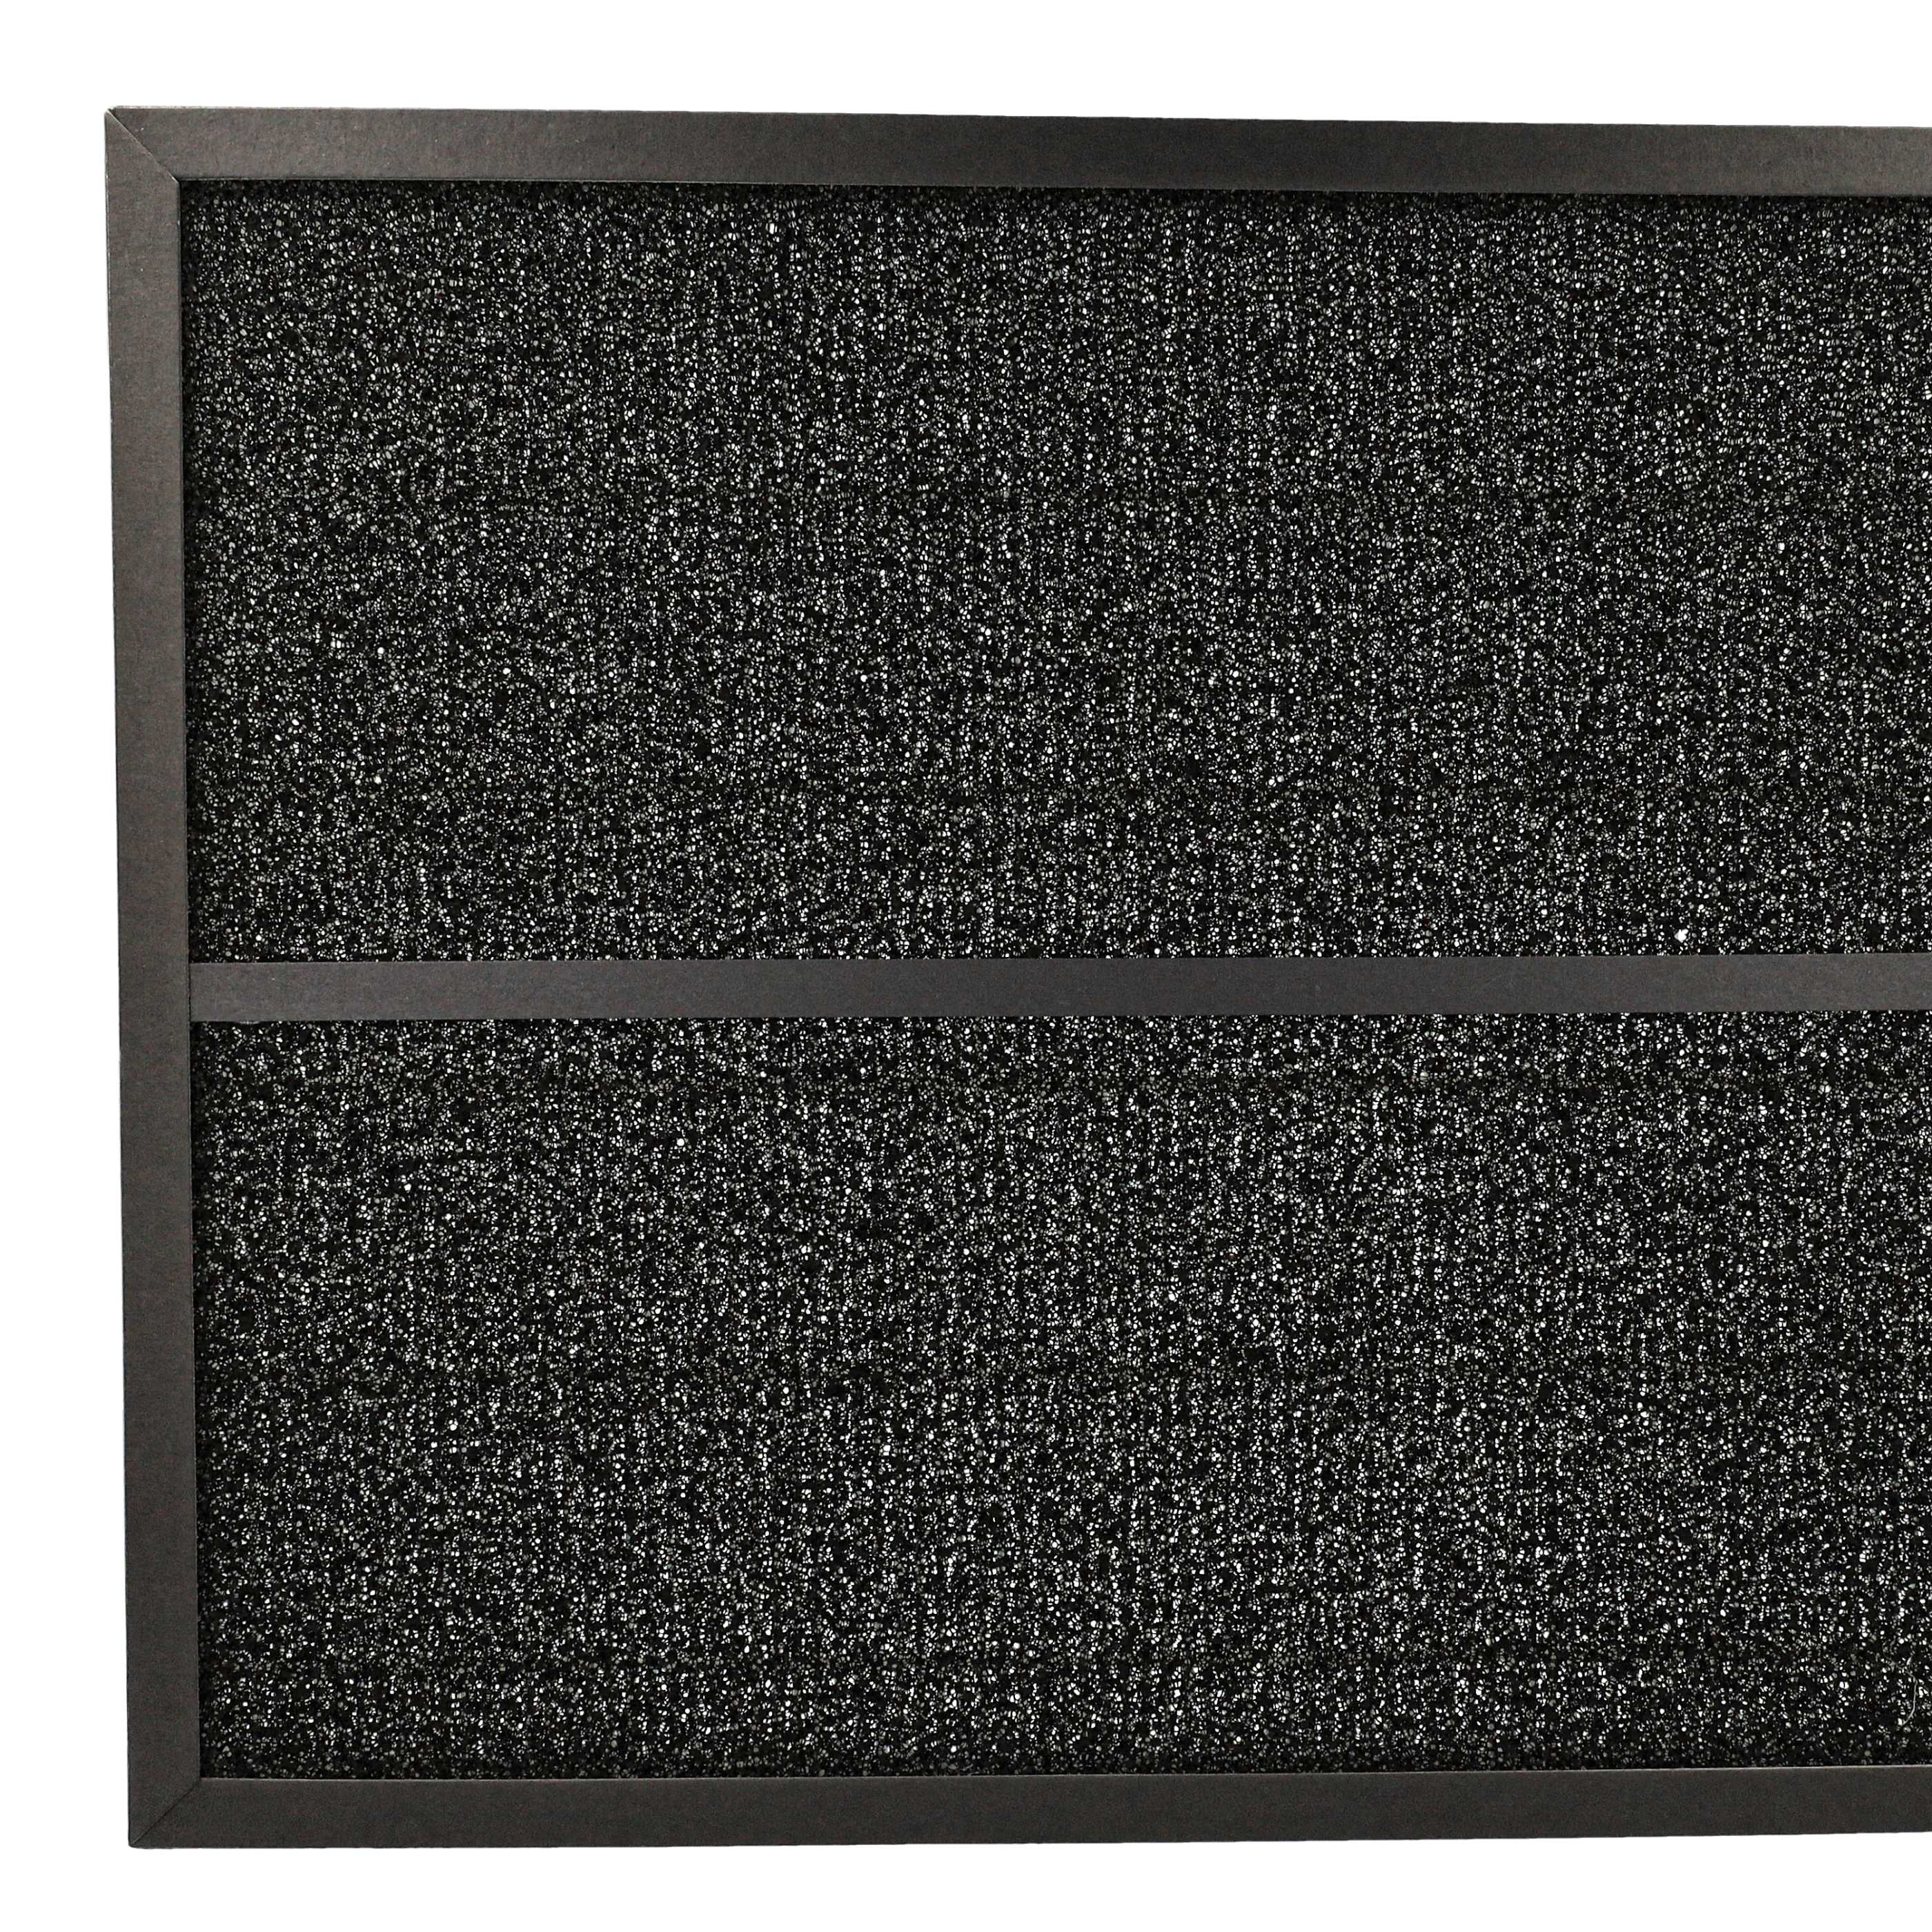 Filter as Replacement for DeLonghi 5513710001 - Activated Carbon + SPM Filter, 38 x 30 x 1.6 cm